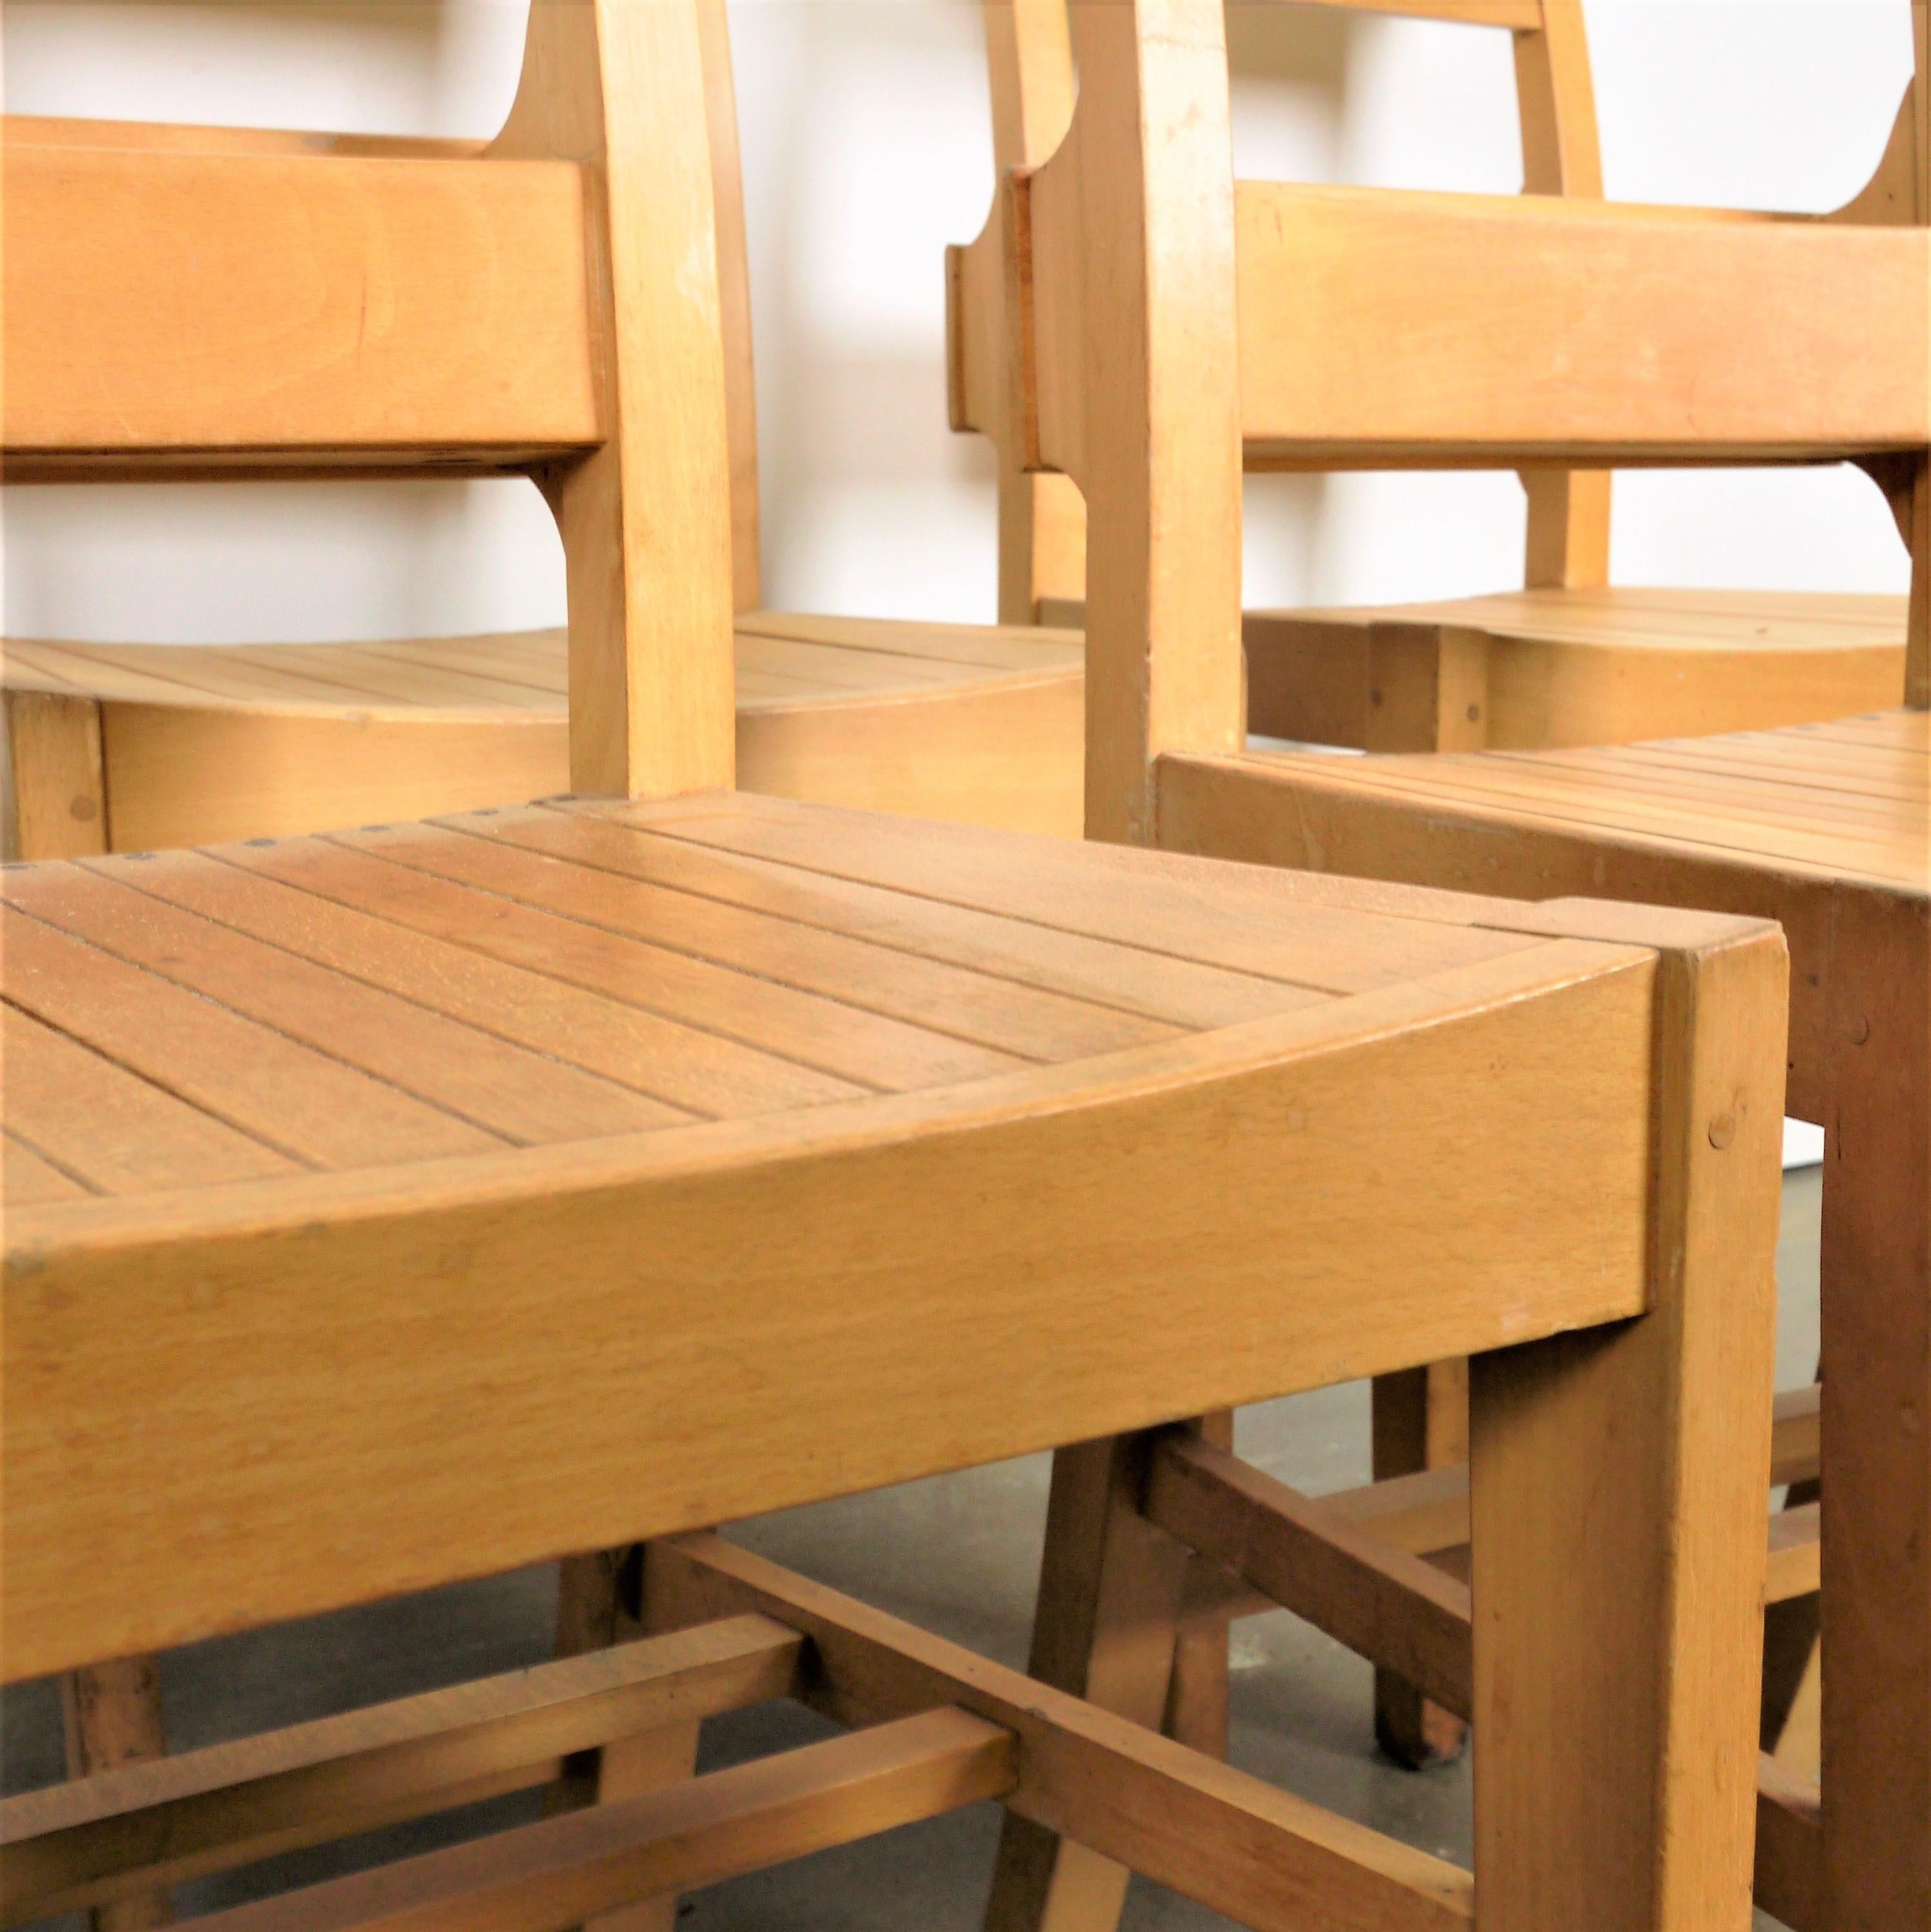 1960s dining church/chapel chairs in beechwood - set of six

Set of six 1960s vintage beechwood dining chapel/church chairs. We were contacted by St Laurence's Church in Ludlow who were in the middle of a modernization program and wanted a good